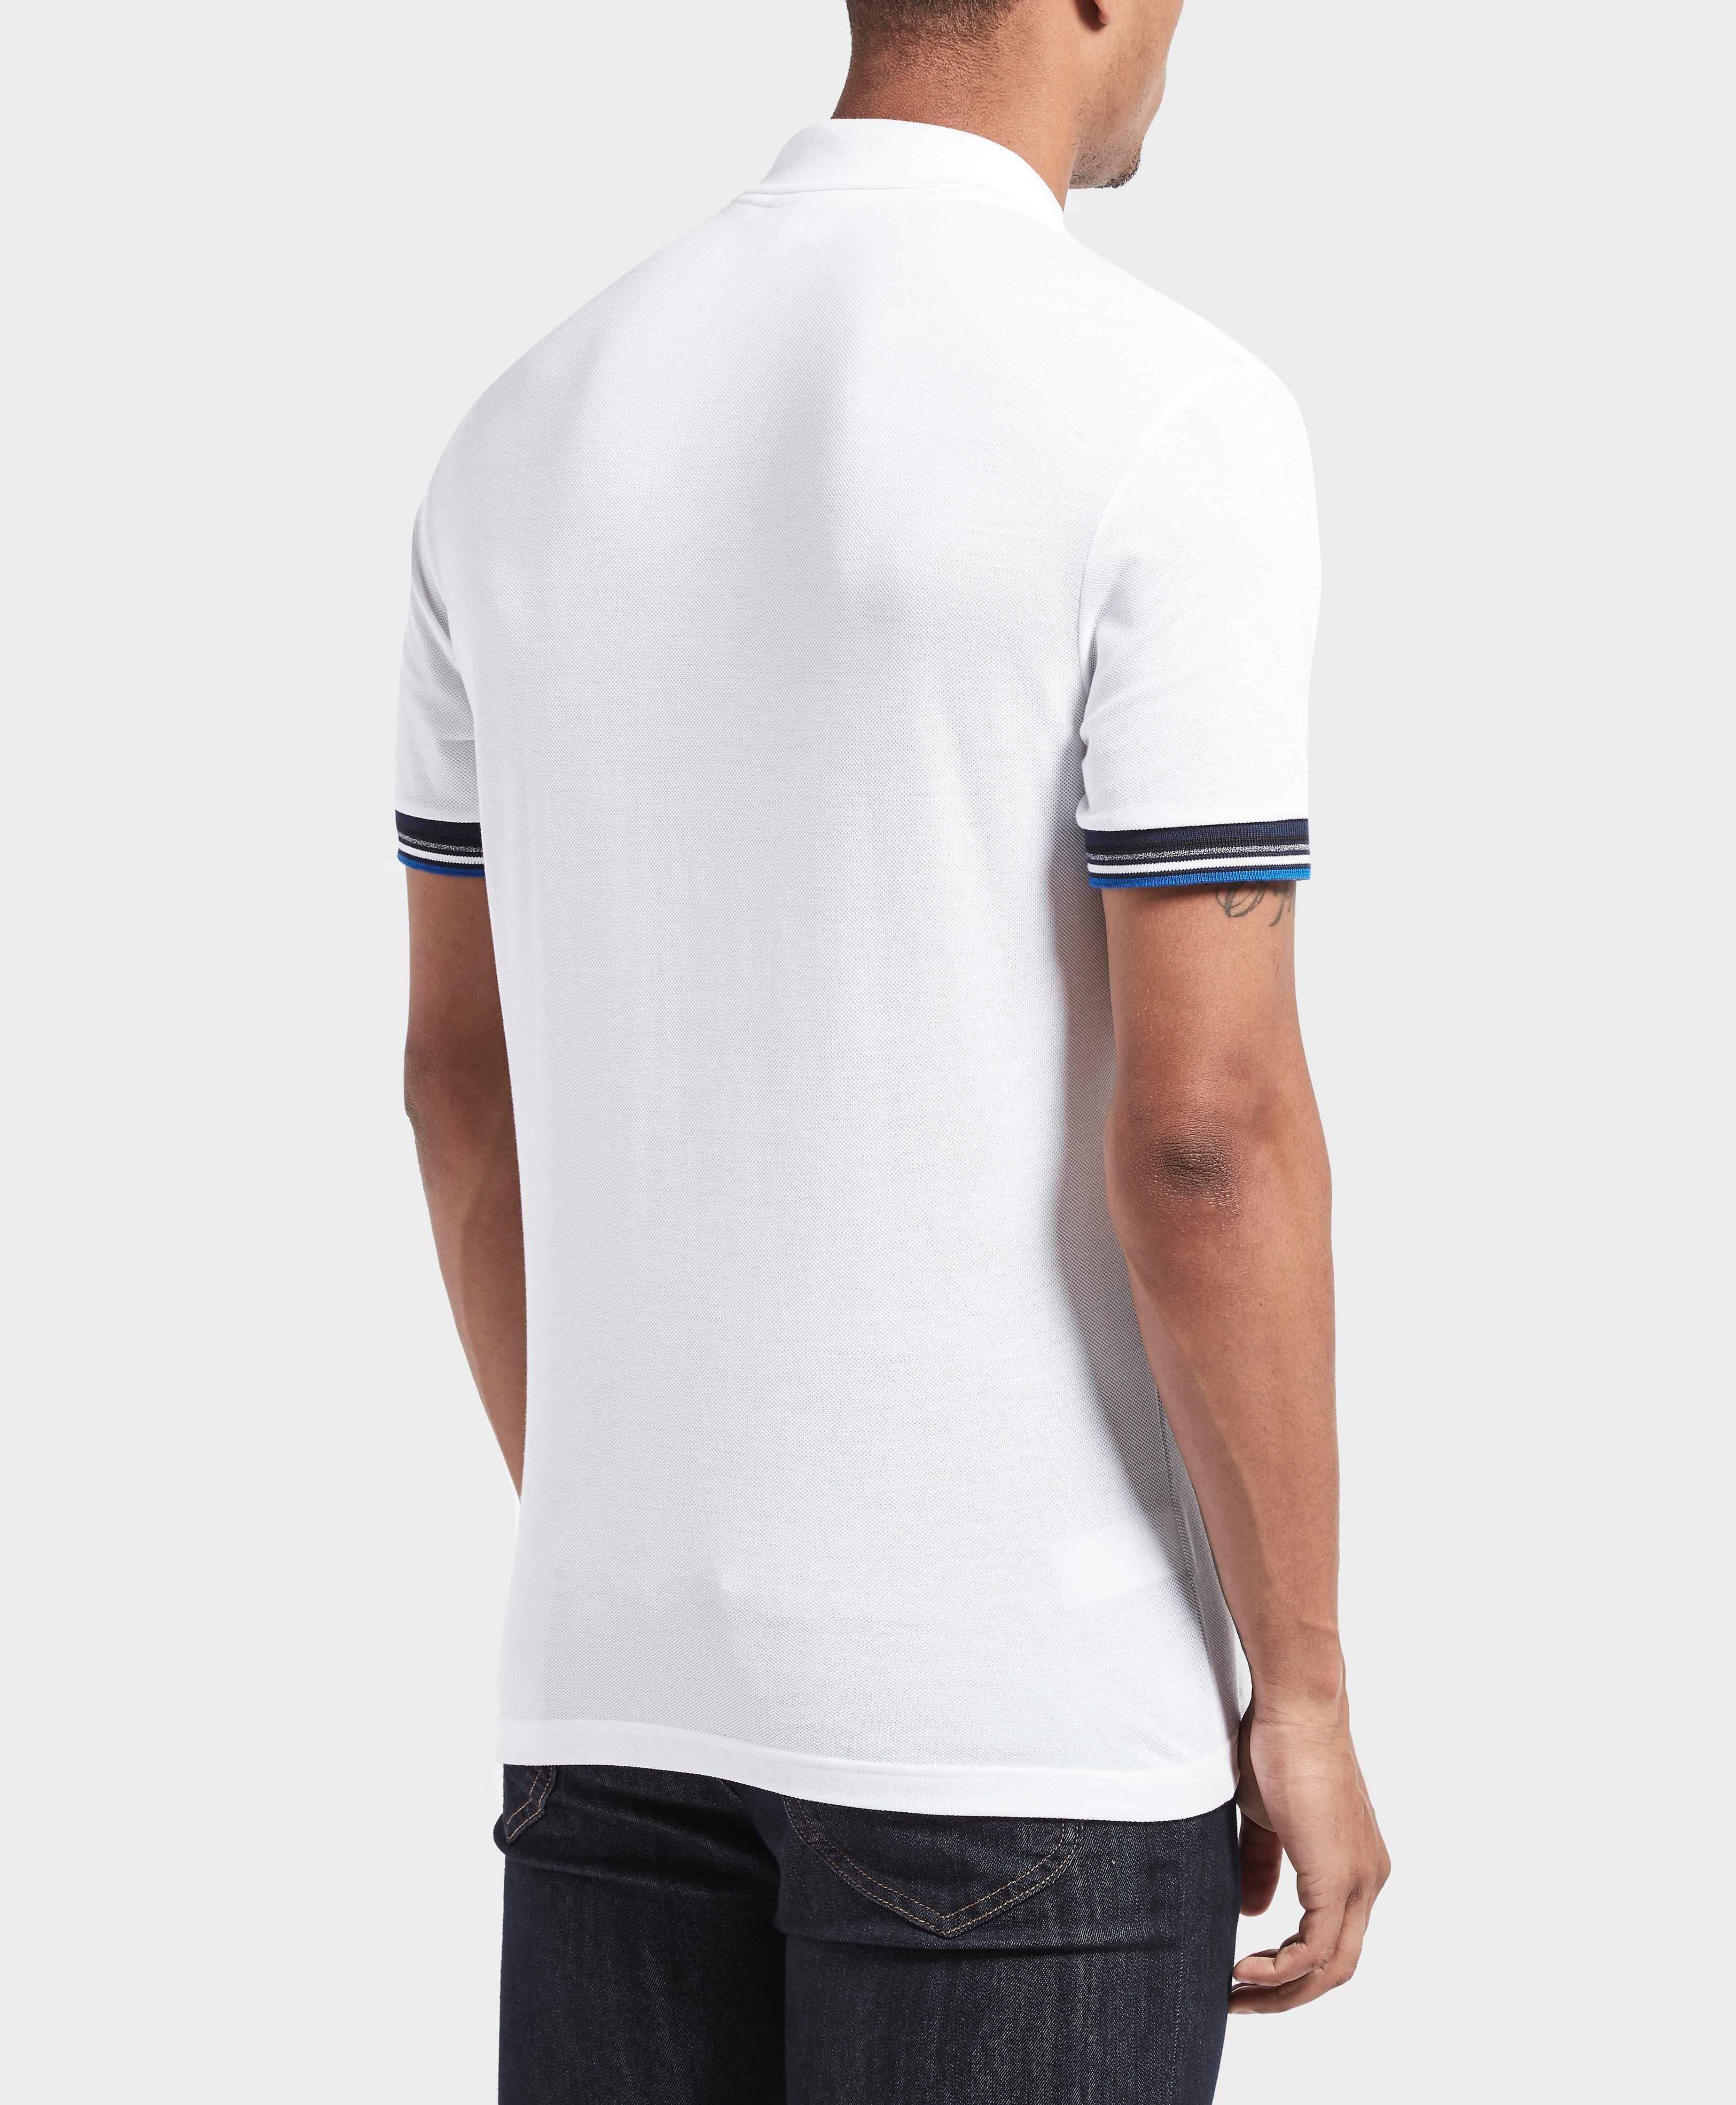 Lyst - Lacoste Ribbed Short Sleeve Polo Shirt in White for Men